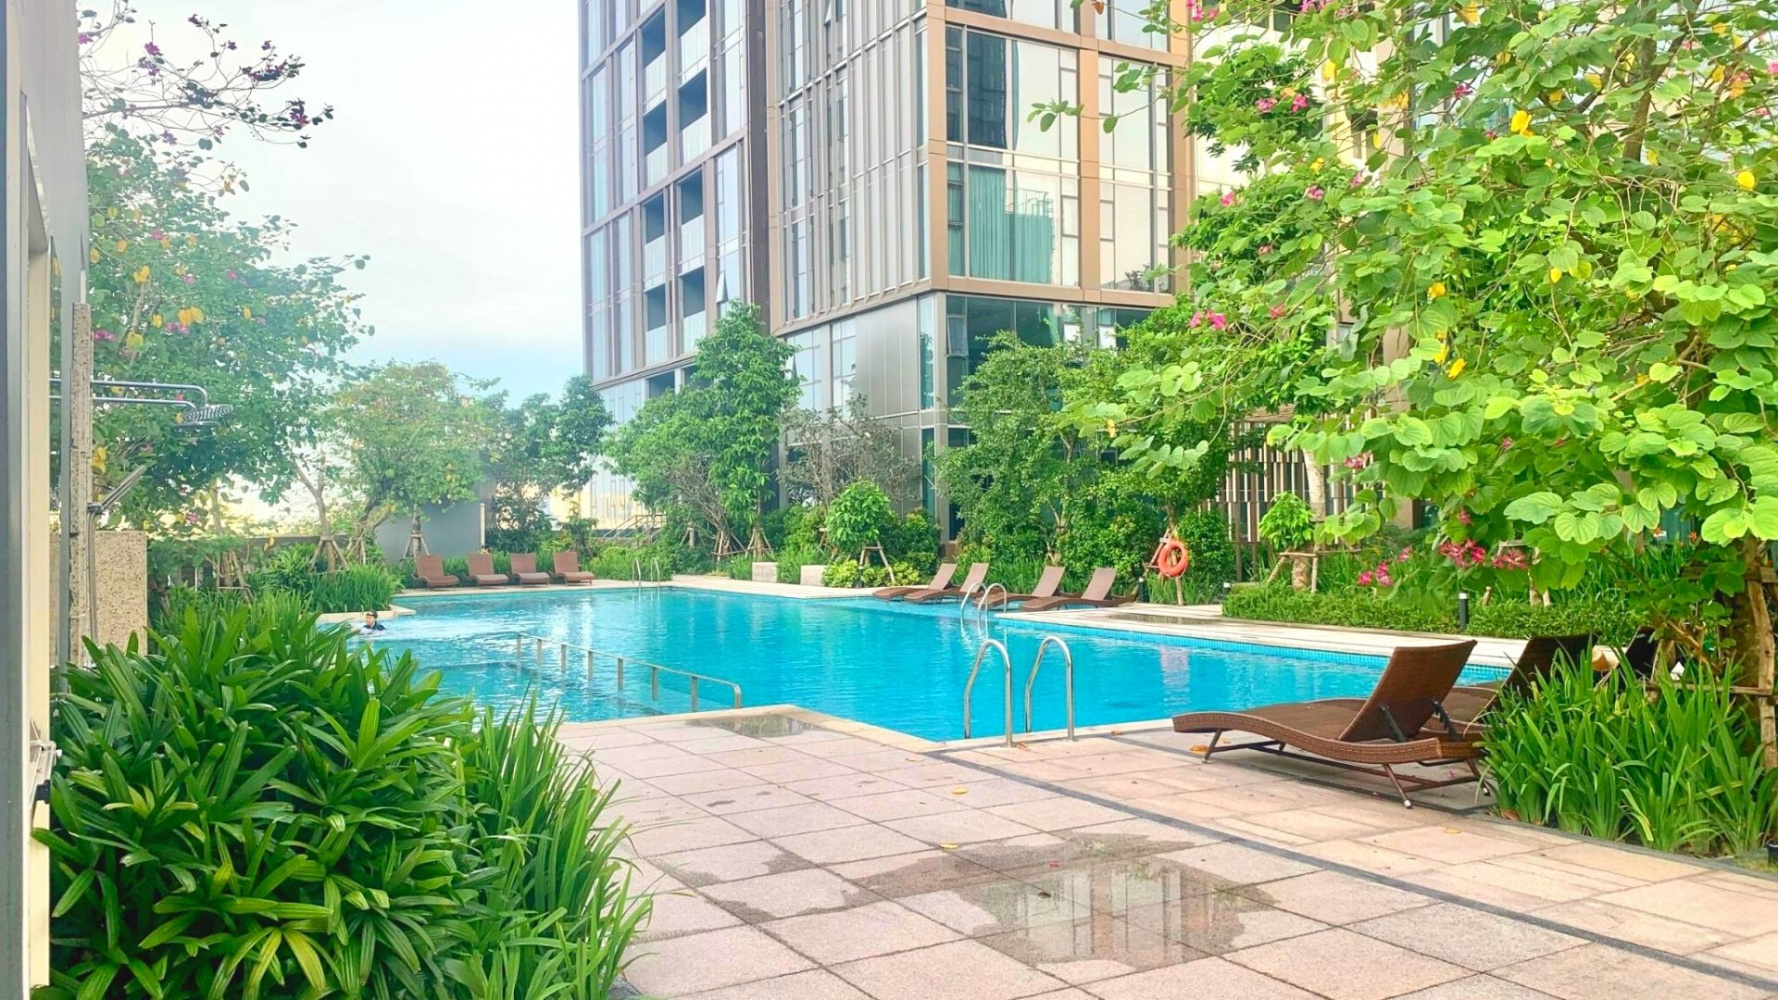 Listing Empire City Apartment For Rent District 2 Thuthiem Thuduc Hcmc (17)